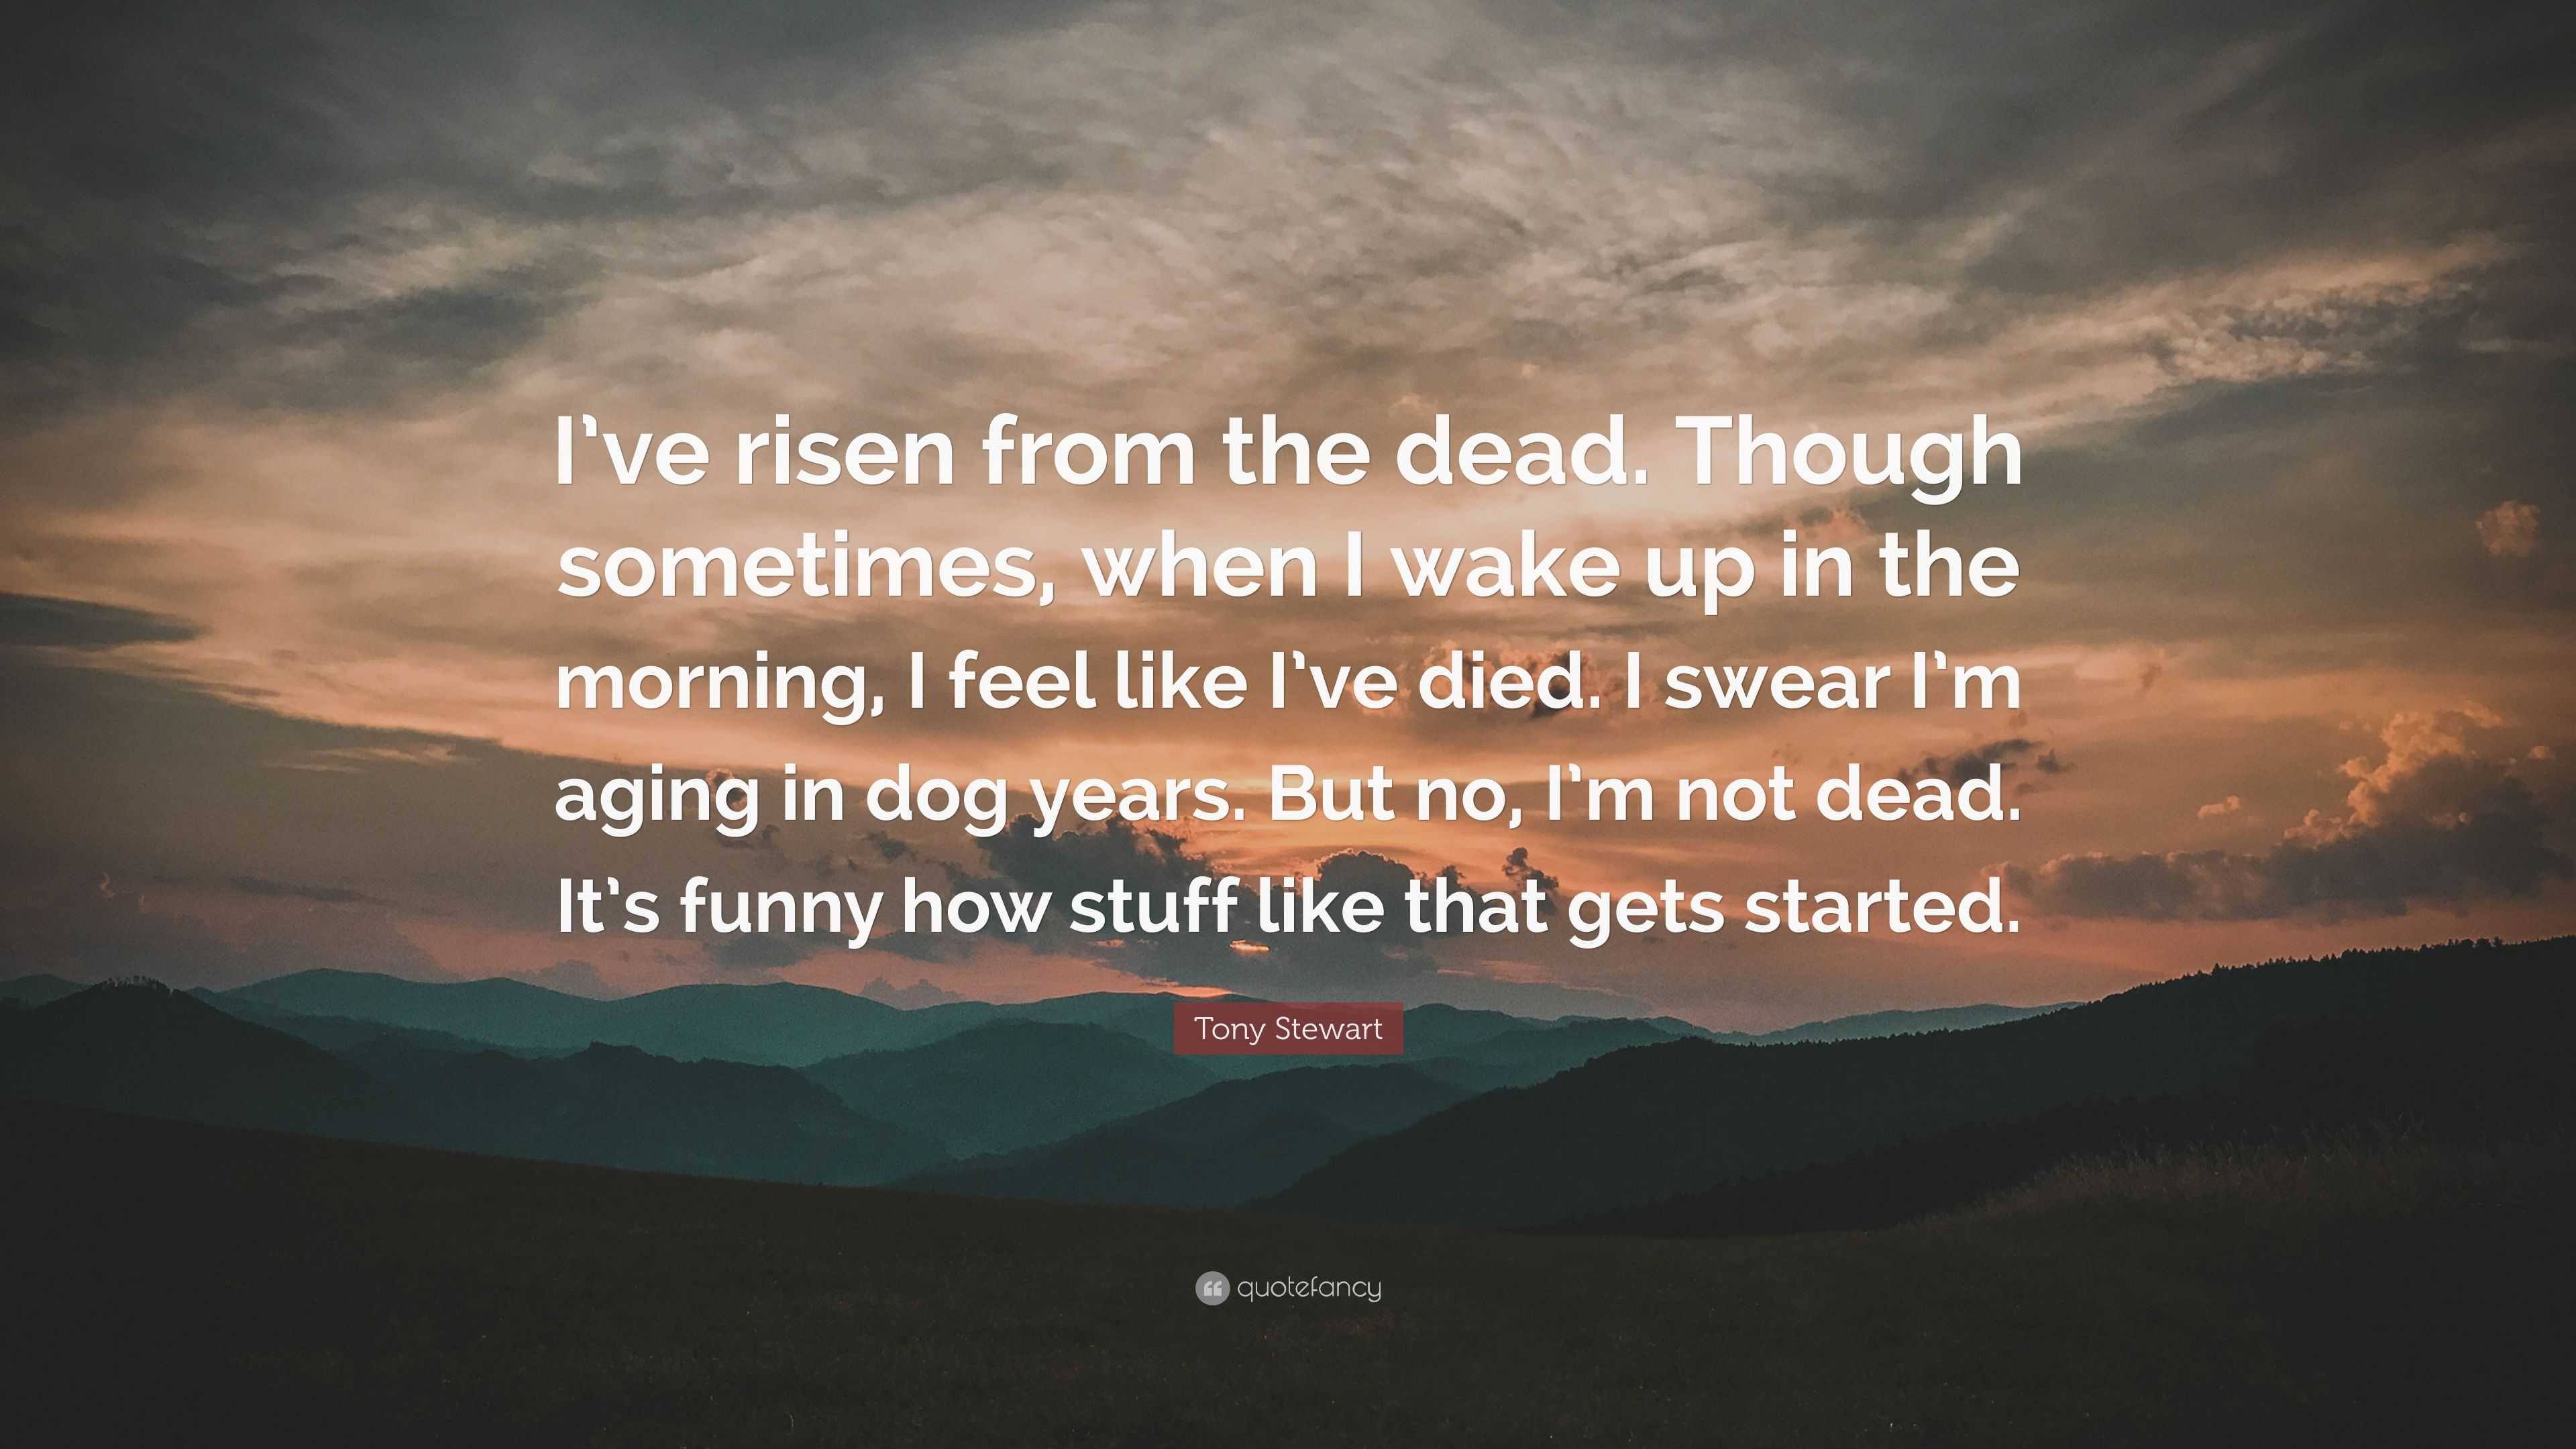 Tony Stewart Quote: “I&#39;ve risen from the dead. Though sometimes, when I  wake up in the morning, I feel like I&#39;ve died. I swear I&#39;m aging in d...”